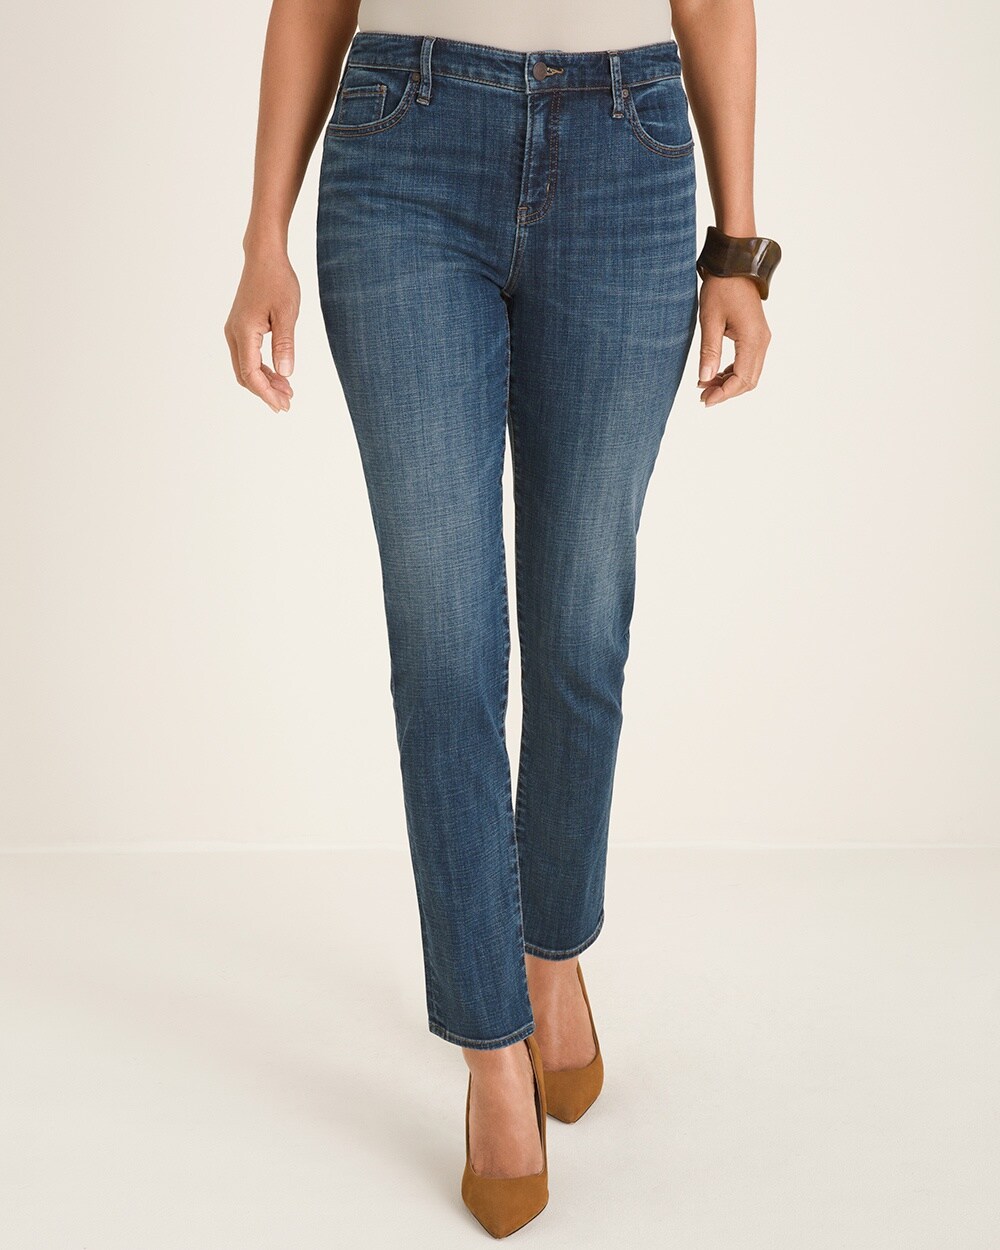 So Slimming Girlfriend Ankle Jeans - Chico's